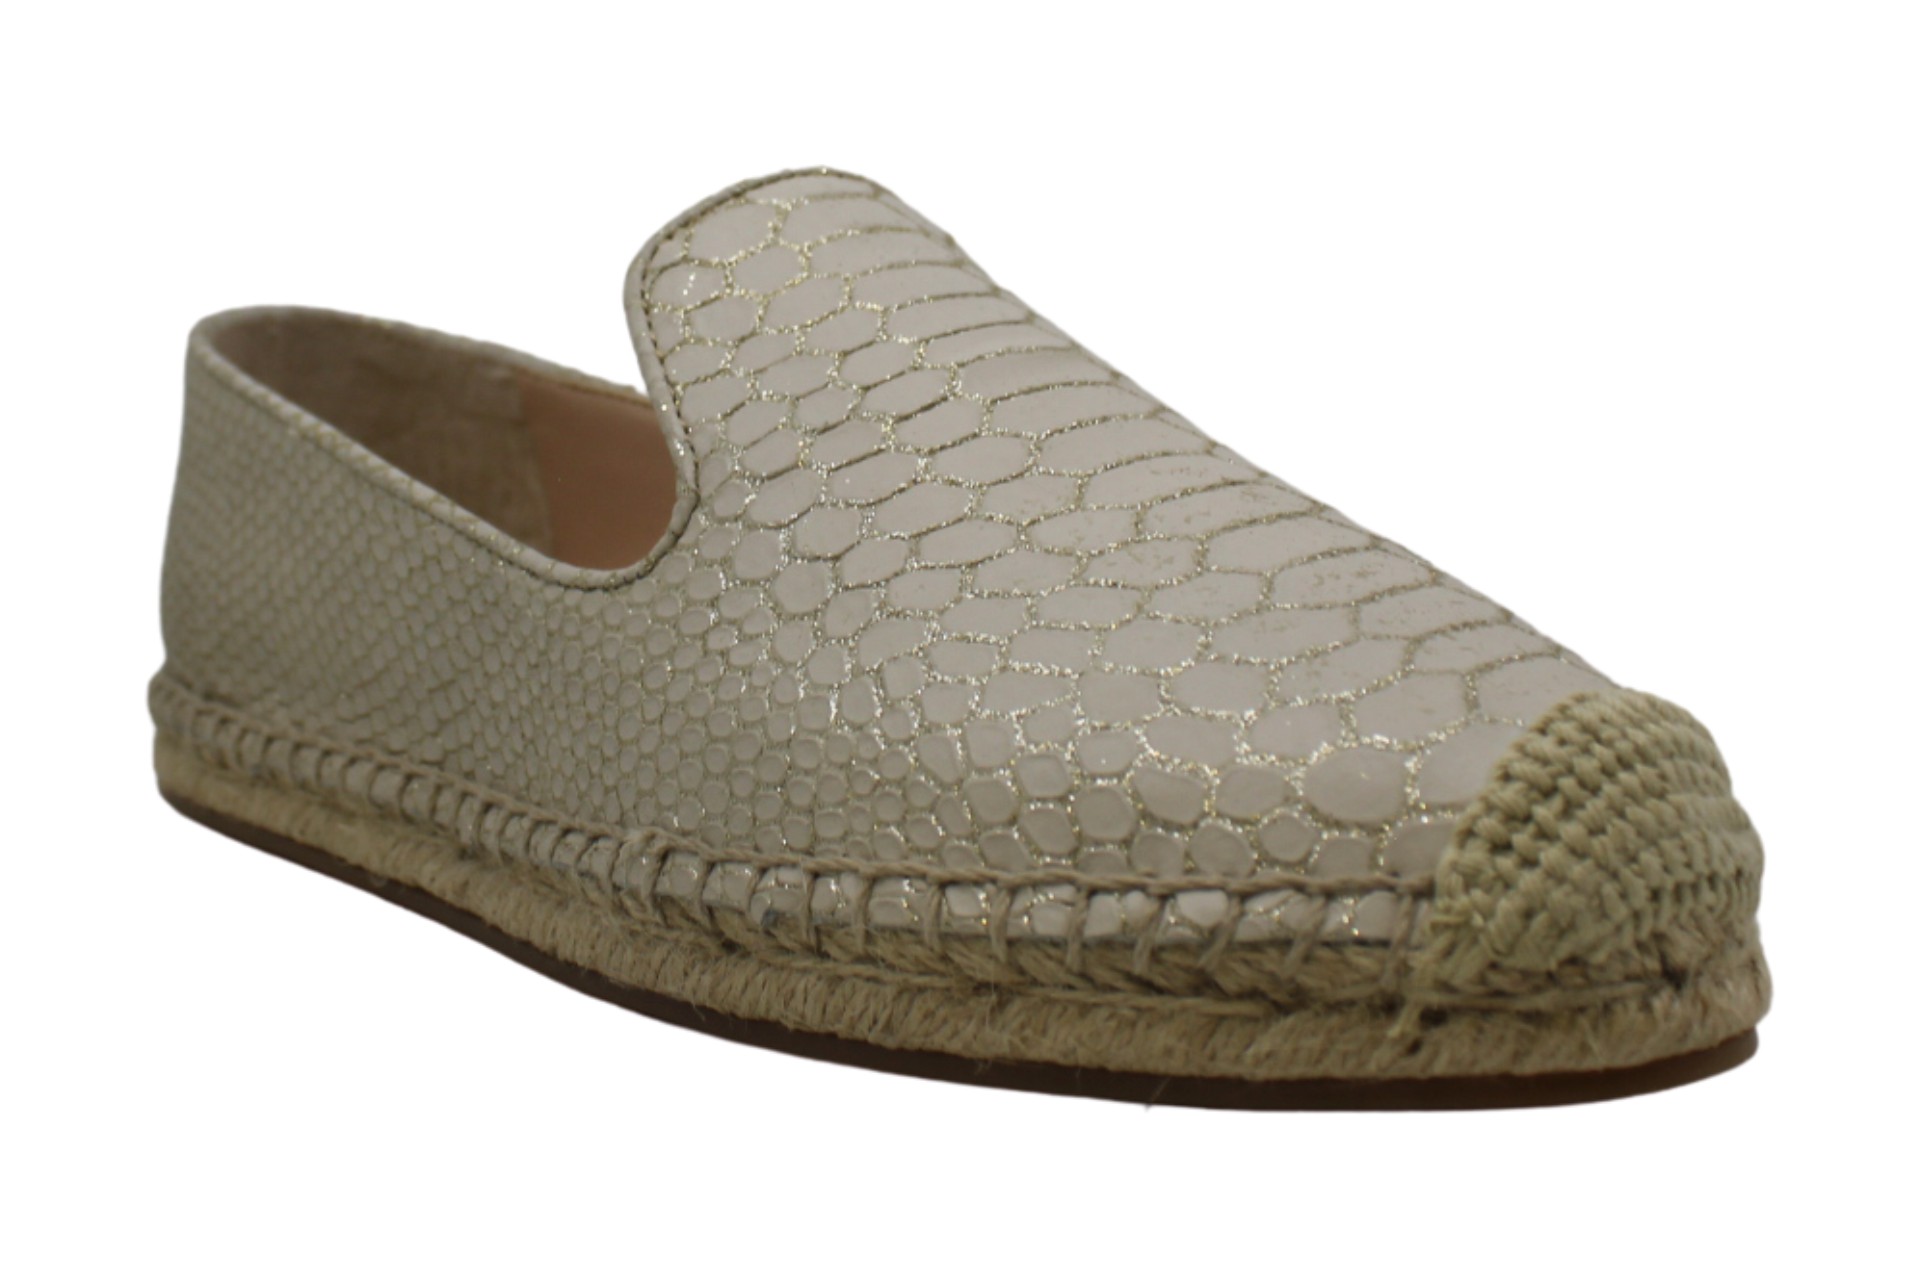 Vince Camuto Womens Darma2 Square Toe Espadrille Flats, Gold, Size 8.0 ...